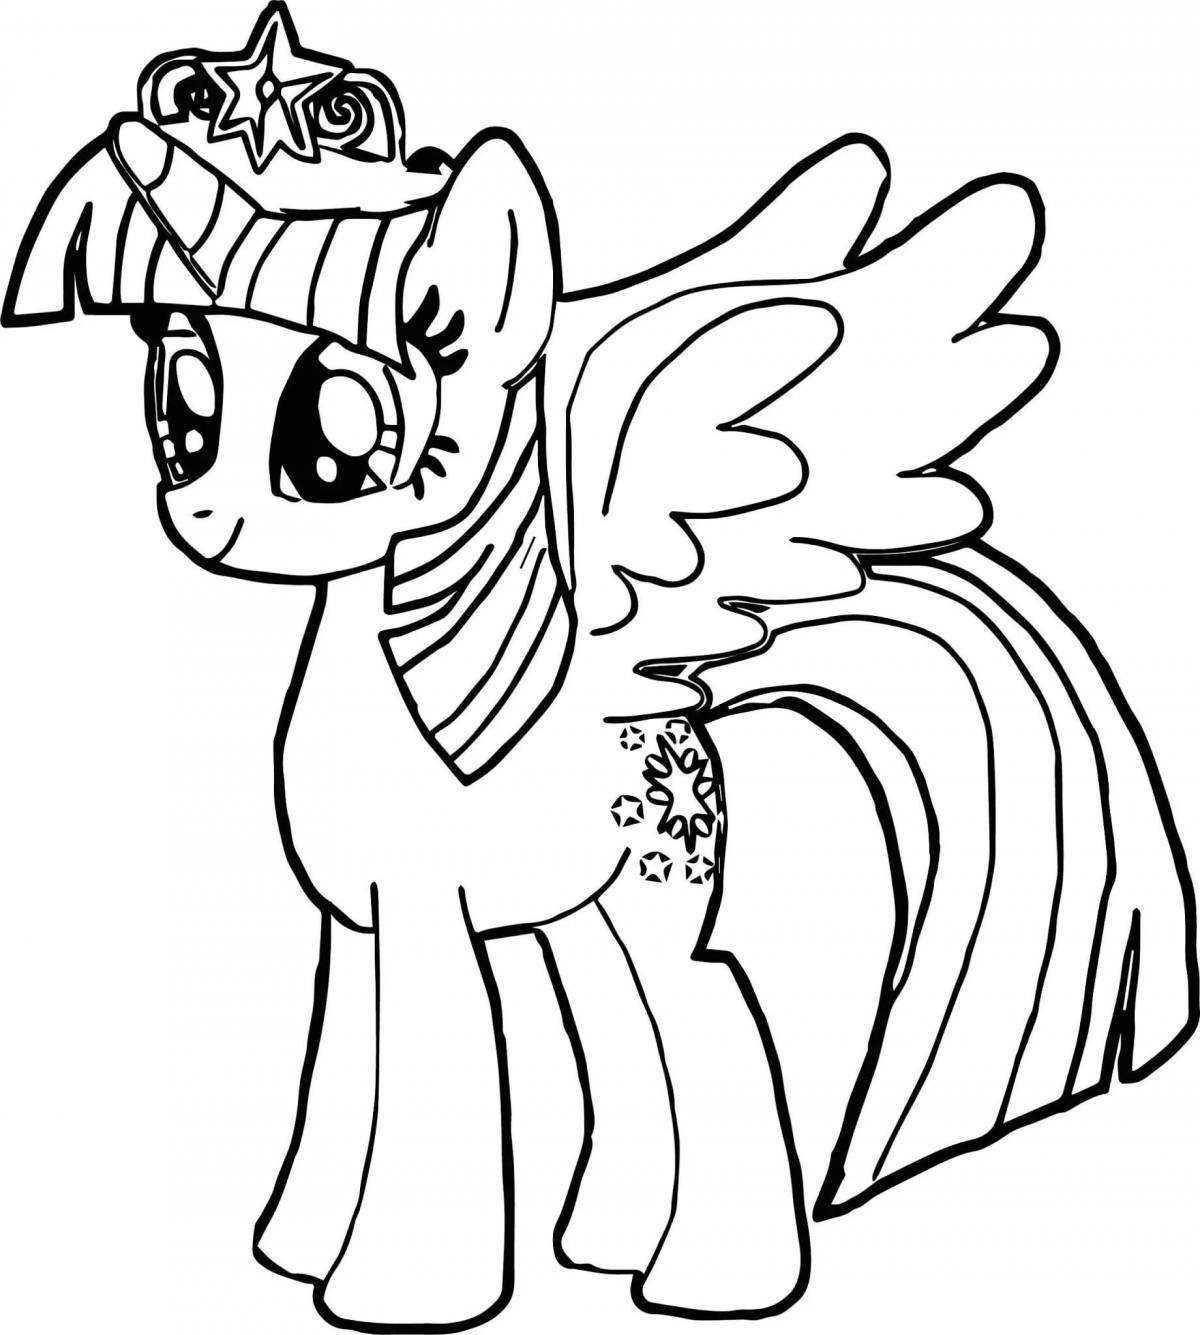 Coloring pony in a dress